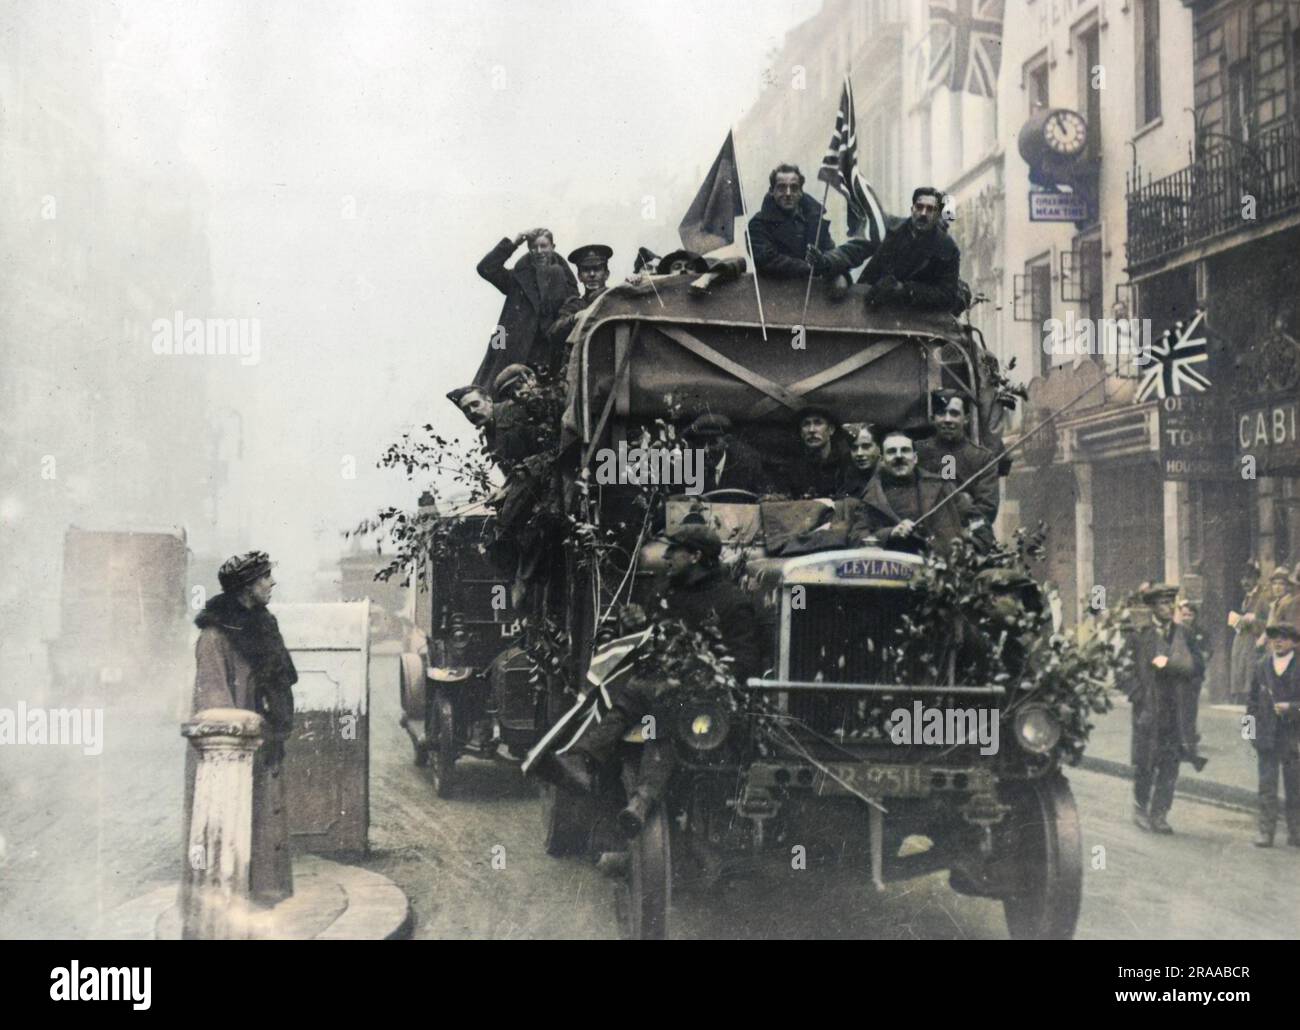 A Leyland lorry in London filled with men celebrating Armistice Day on 11th November 1918. Some wear military uniform, others civilian clothes.     Date: 11th November 1918 Stock Photo